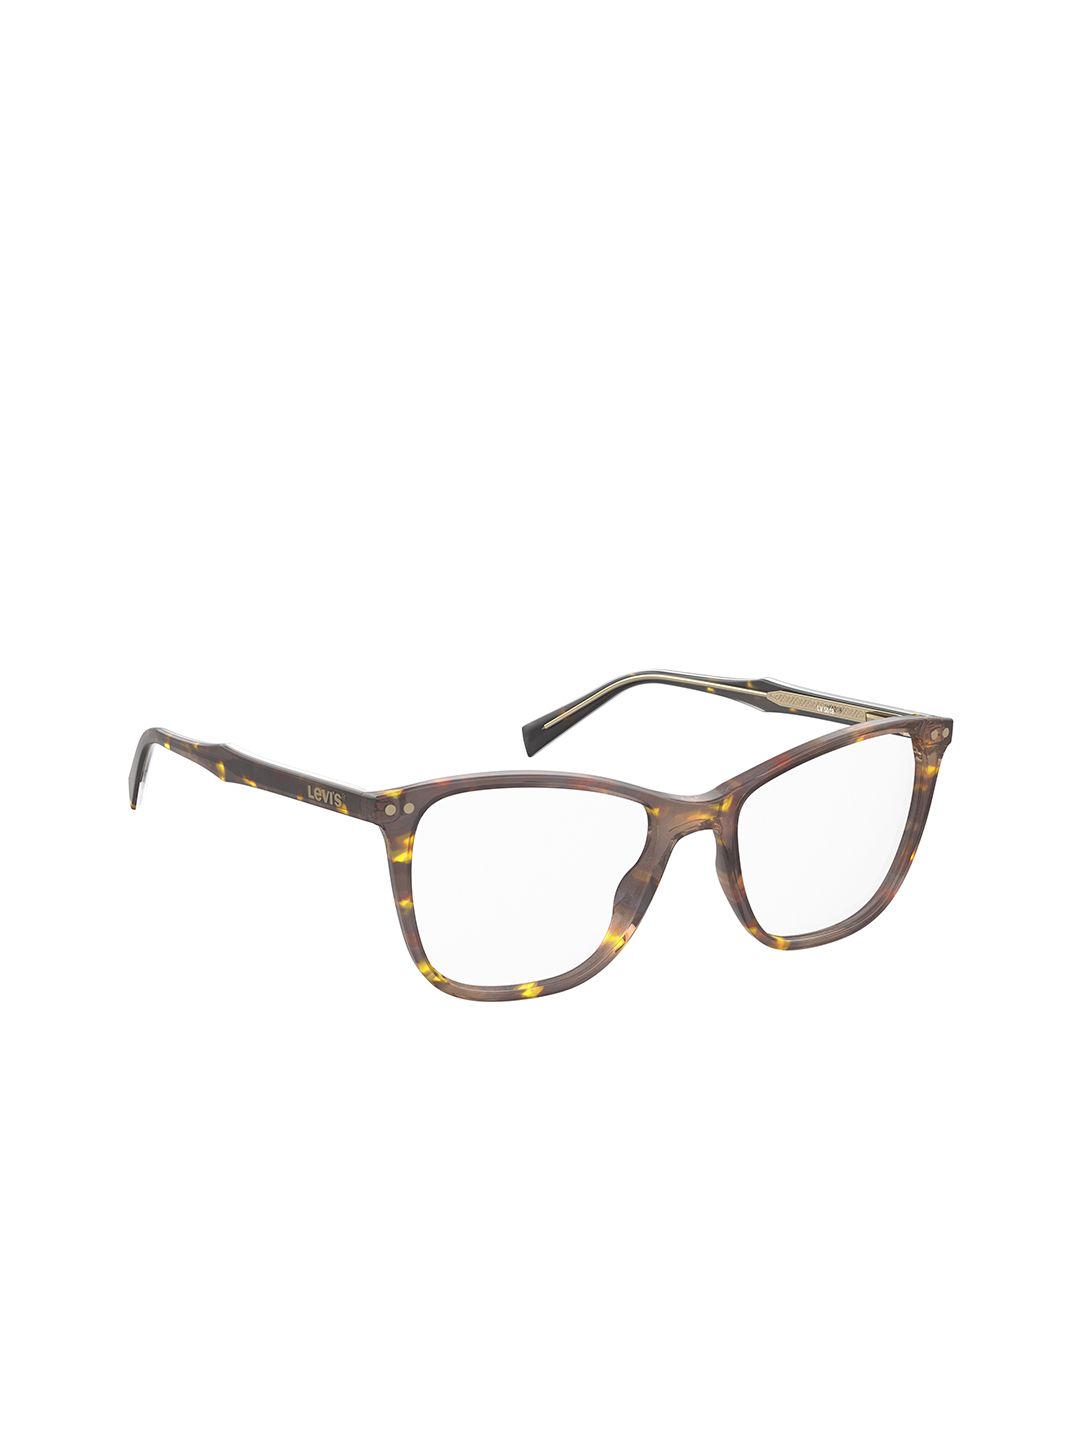 Levis Women Clear Lens & Brown Aviator Sunglasses with Polarised Lens LV 5018 086 5217 Price in India